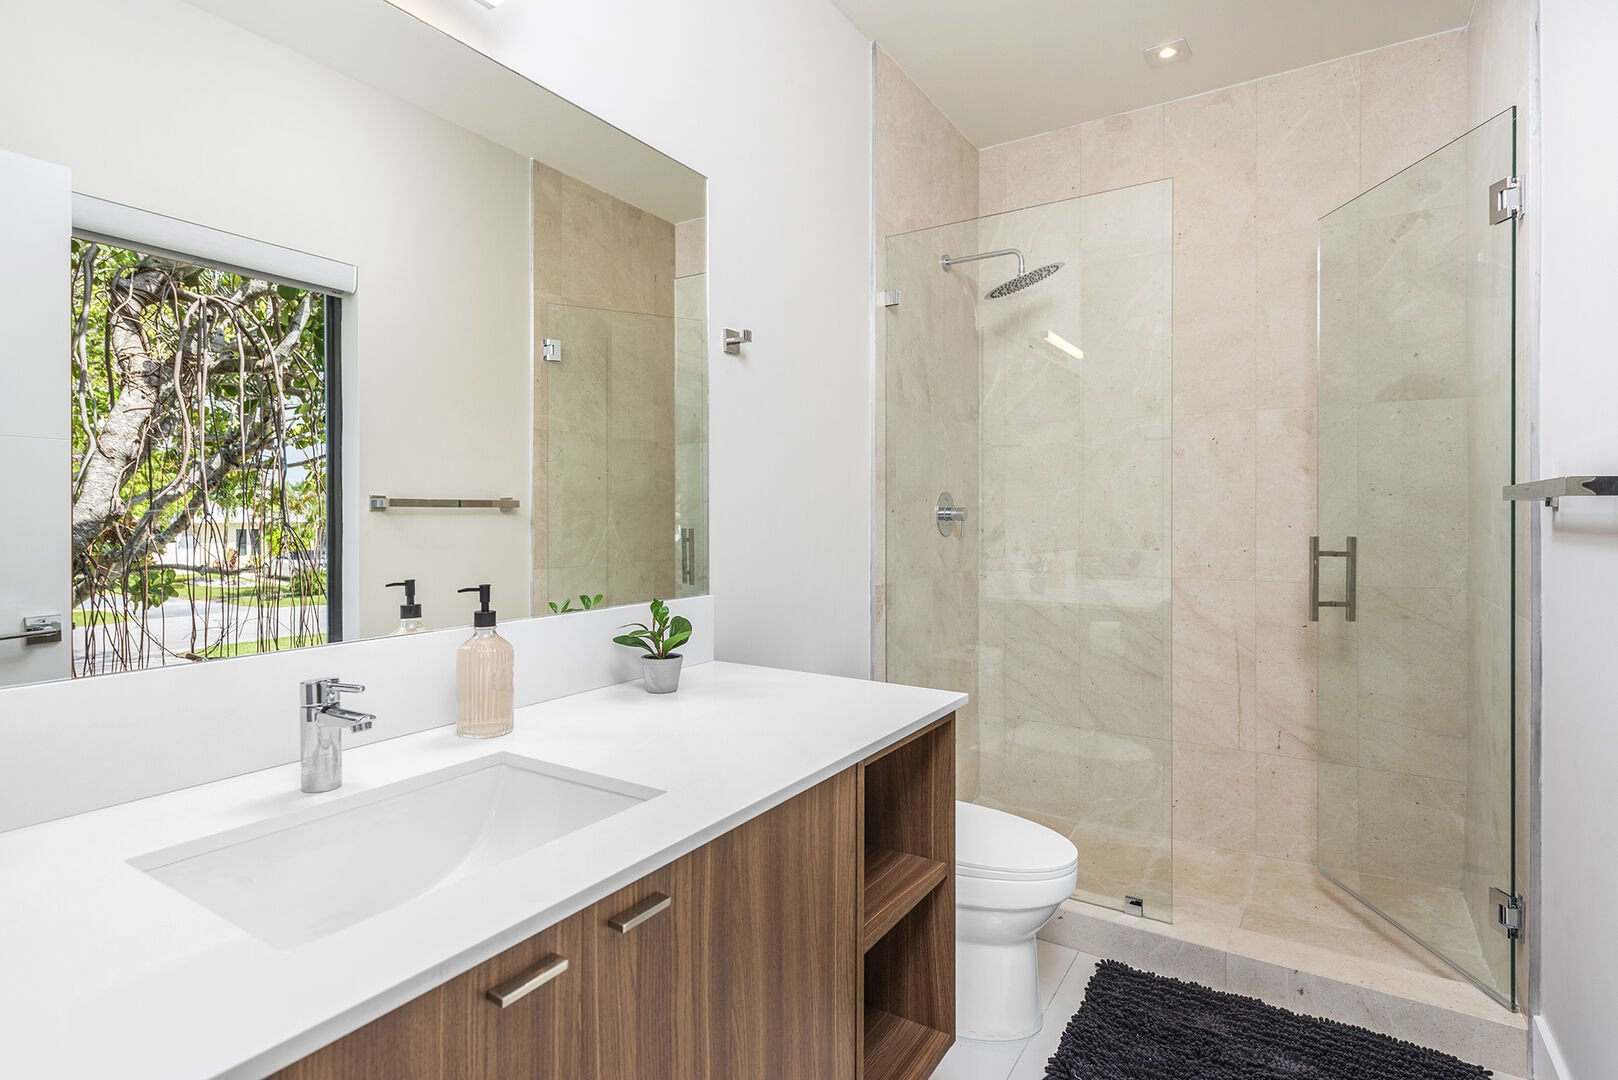 The ensuite bathroom features a walk-in shower with Fiji amenities and Comphy opulent towels.